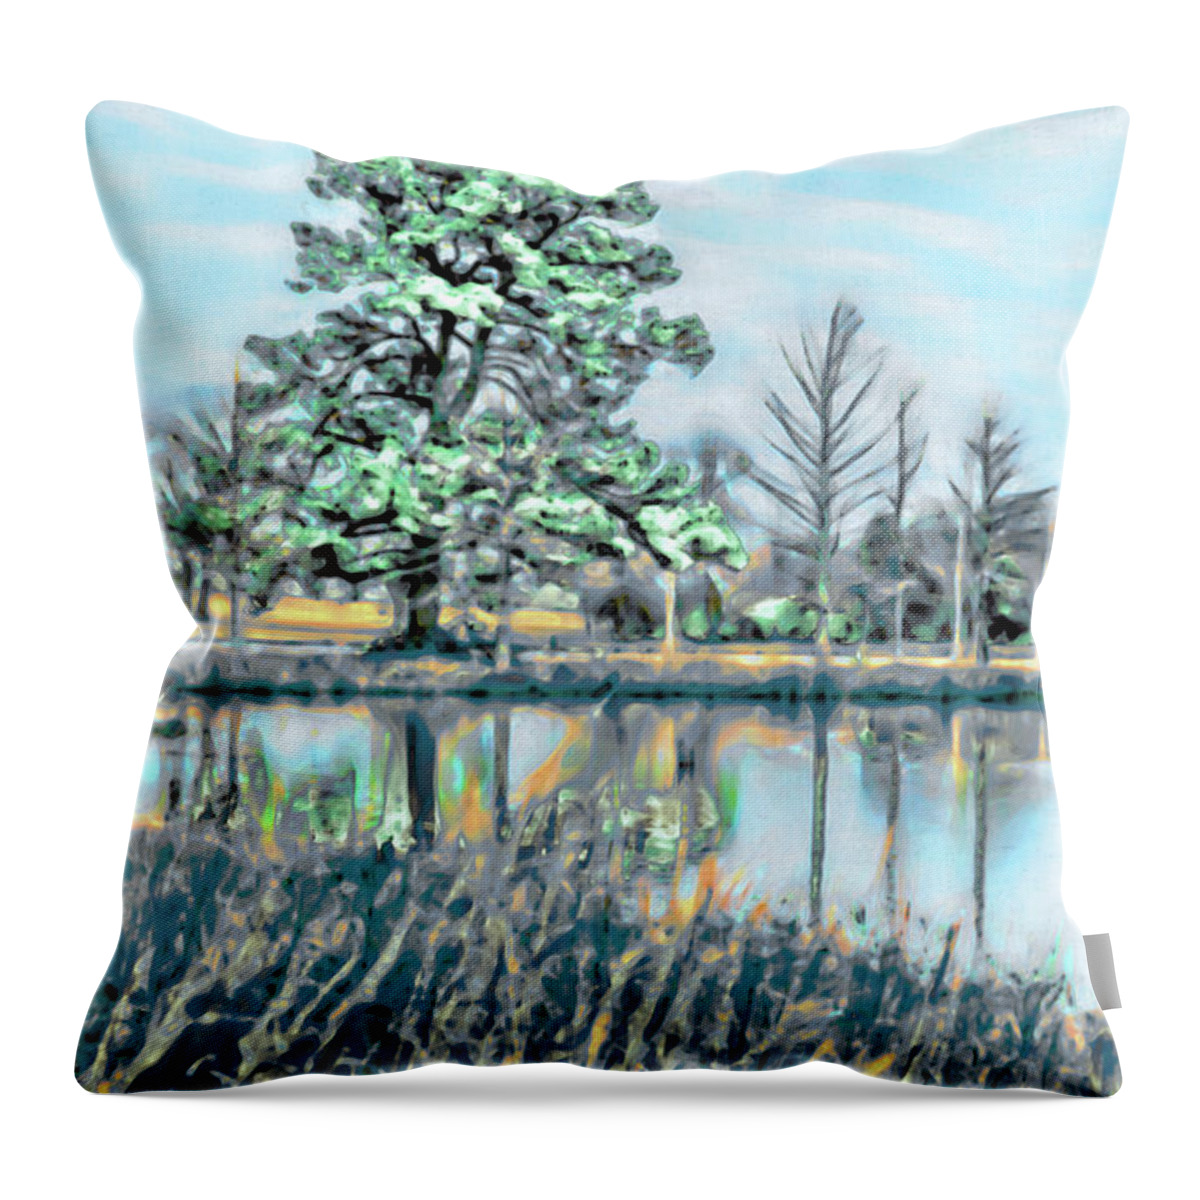 Pond Throw Pillow featuring the photograph Watercolor Pond Scenery by Gina O'Brien